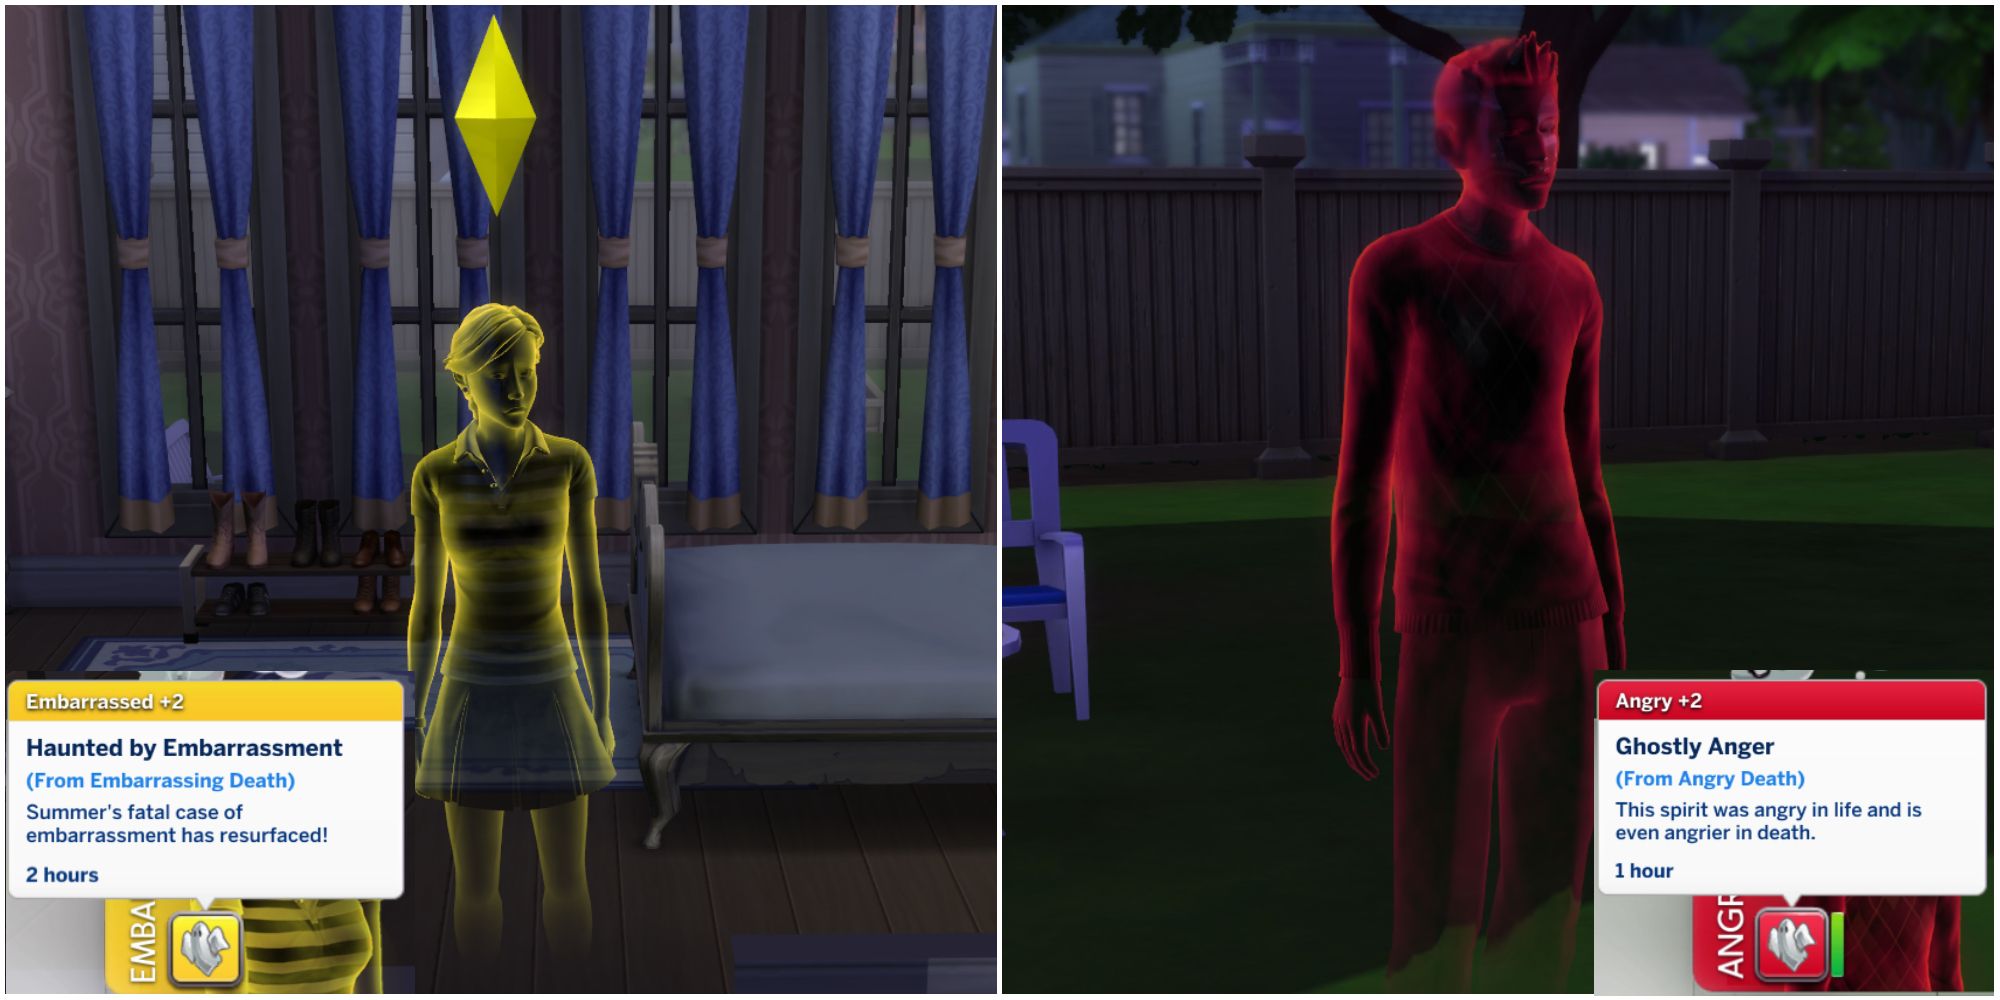 The emotional effects of sims after they have died an emotional death